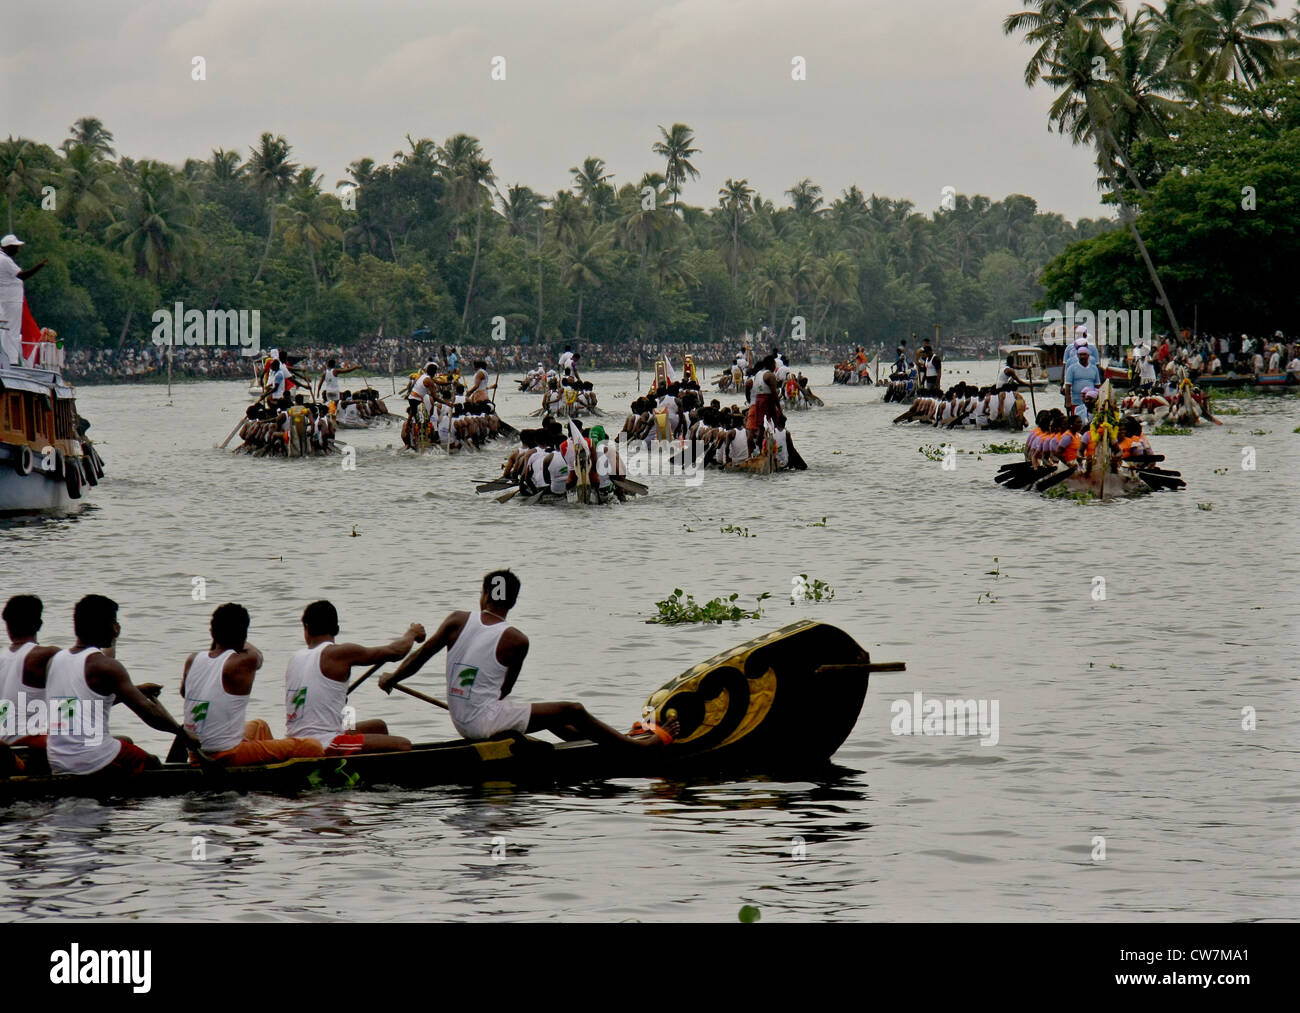 rowers from nehru trophy boat race in alappuzha  back waters formerly known as alleppey,kerala,india Stock Photo